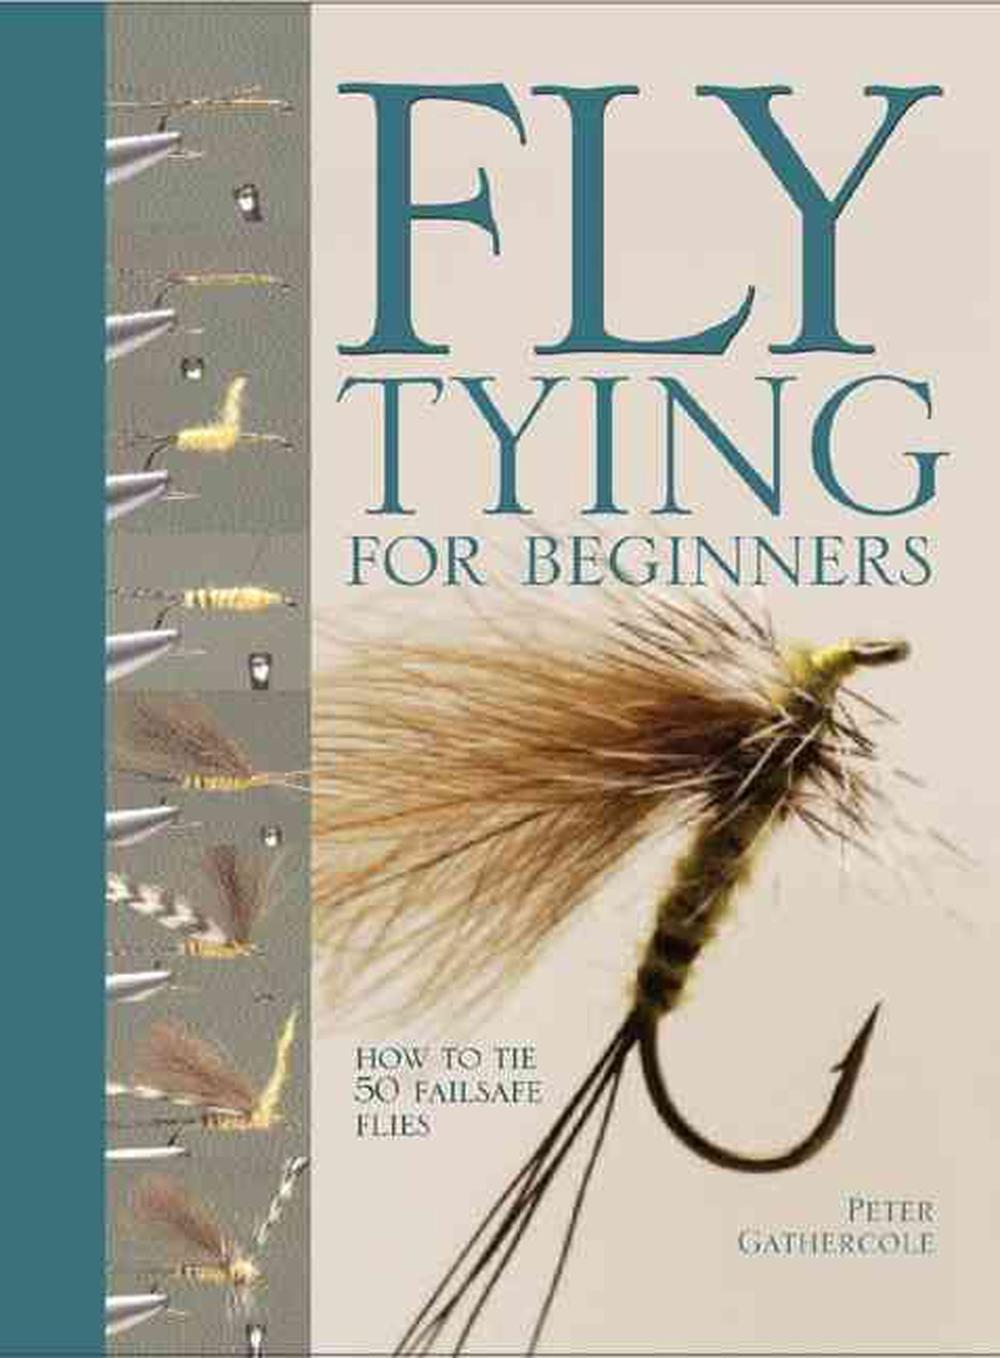 Fly Tying for Beginners by Peter Gathercole, Hardcover